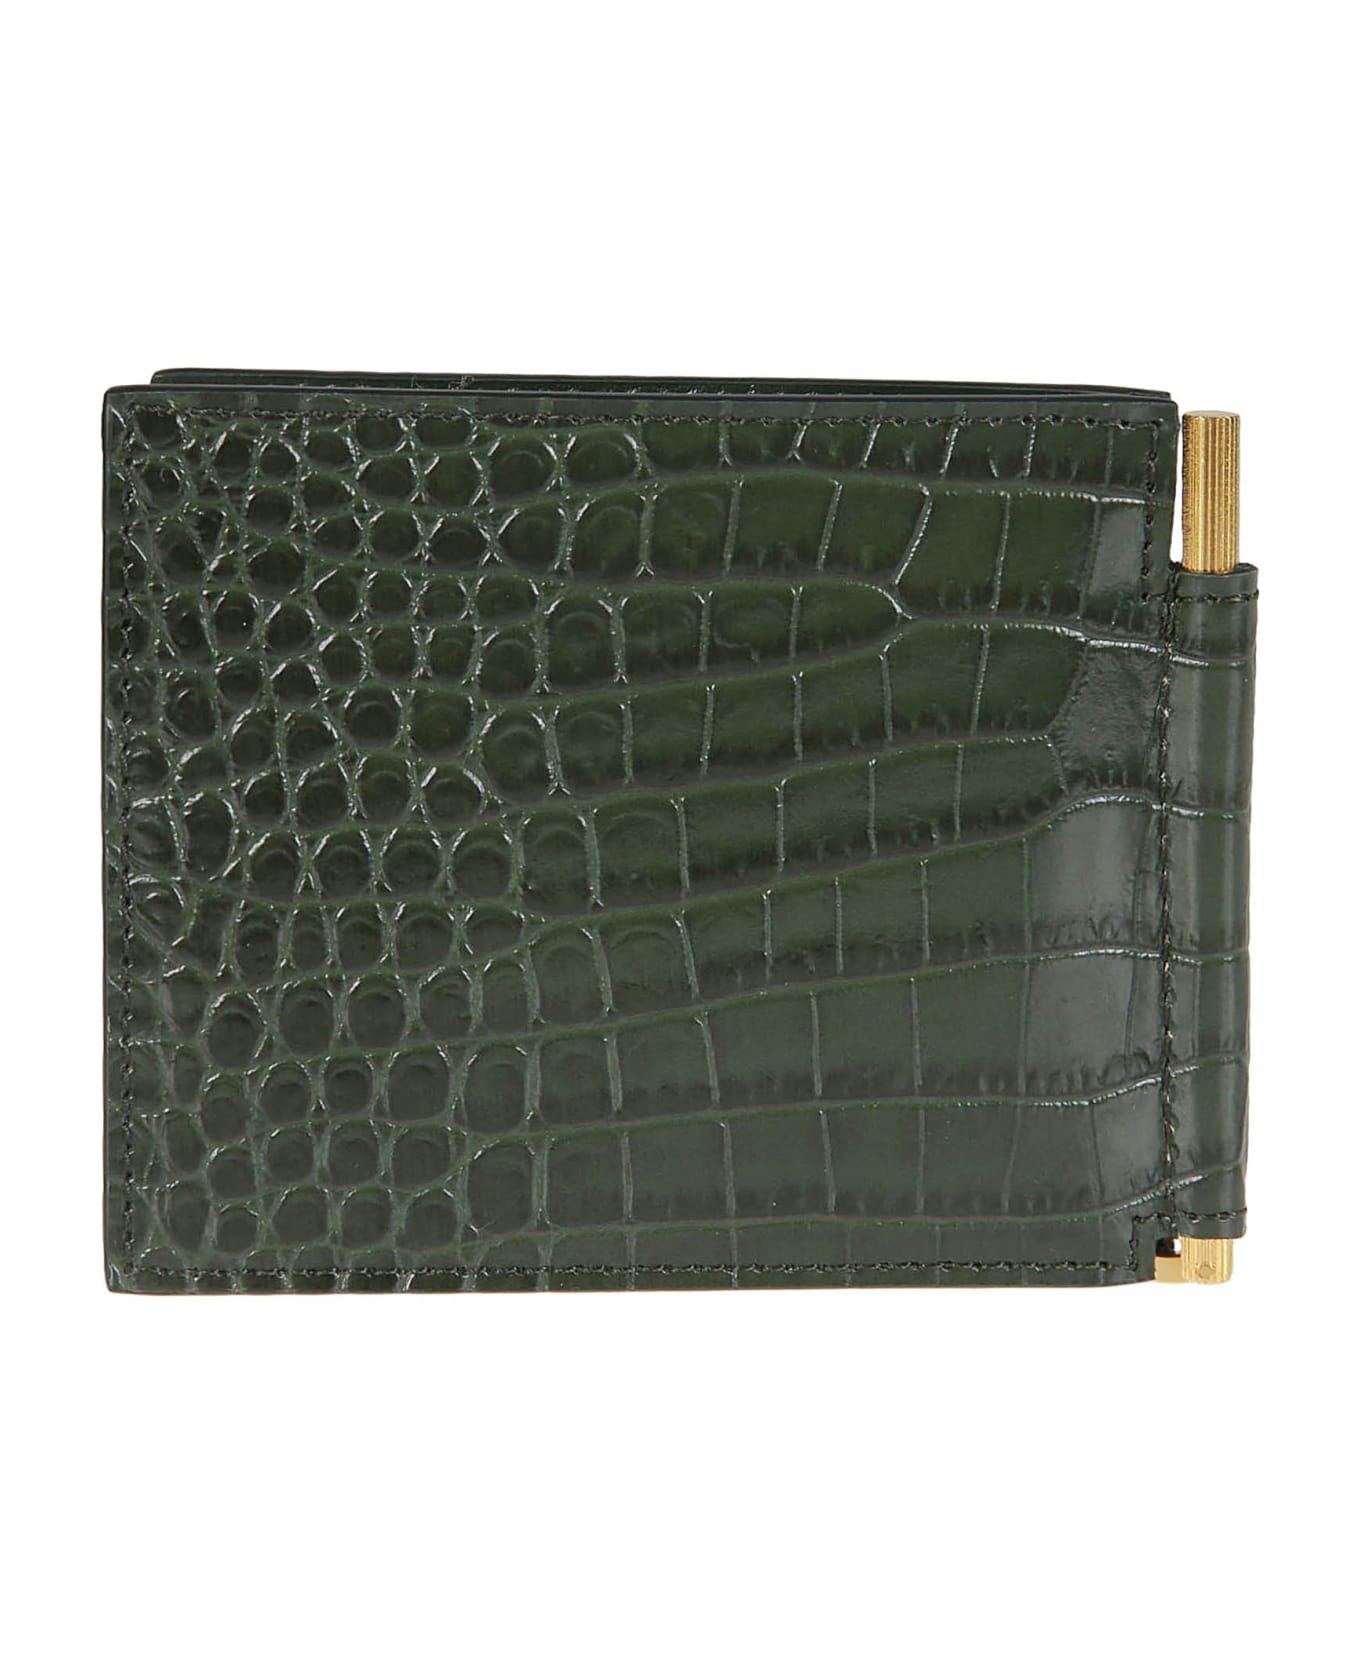 Tom Ford Printed Alligator Money Clip Wallet - Rifle Green